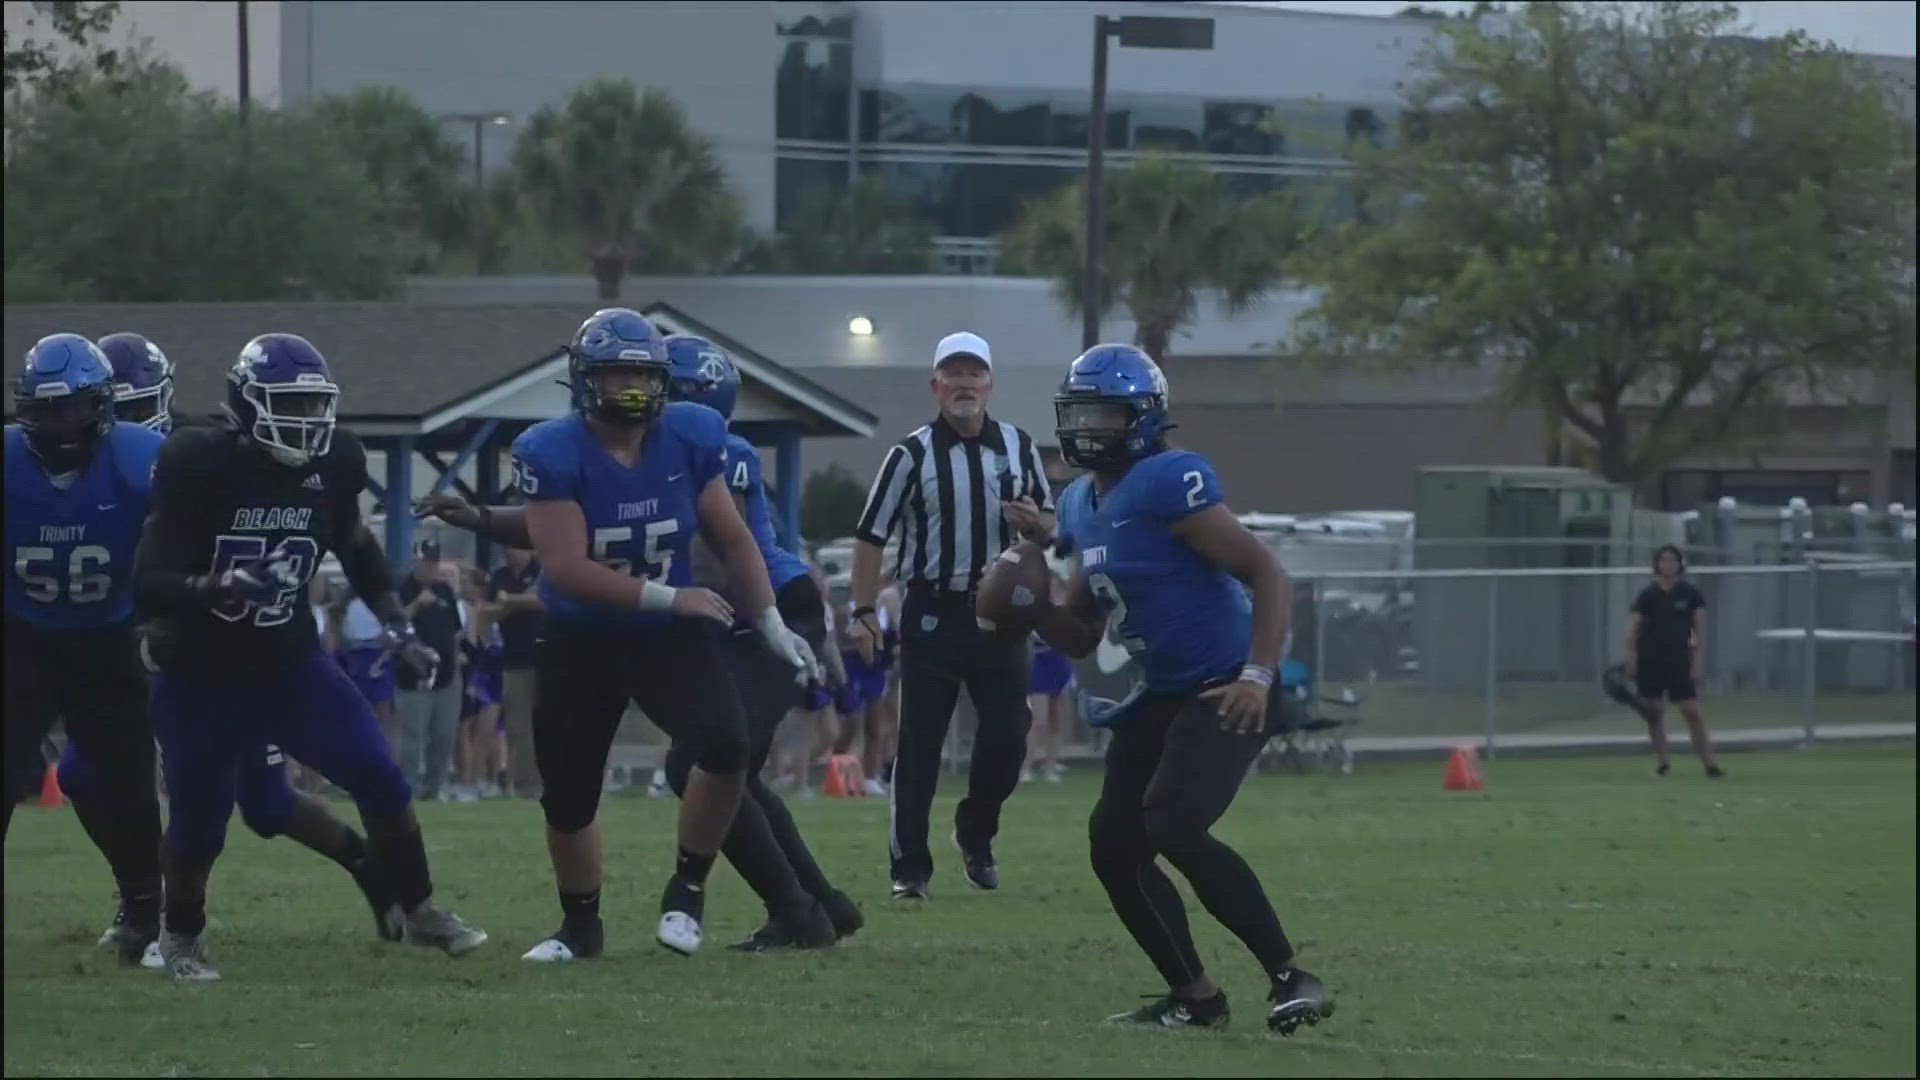 Trinity Christian, Ribault, Baldwin and Nease were among the handful of First Coast high school football teams playing in Spring games Thursday night.